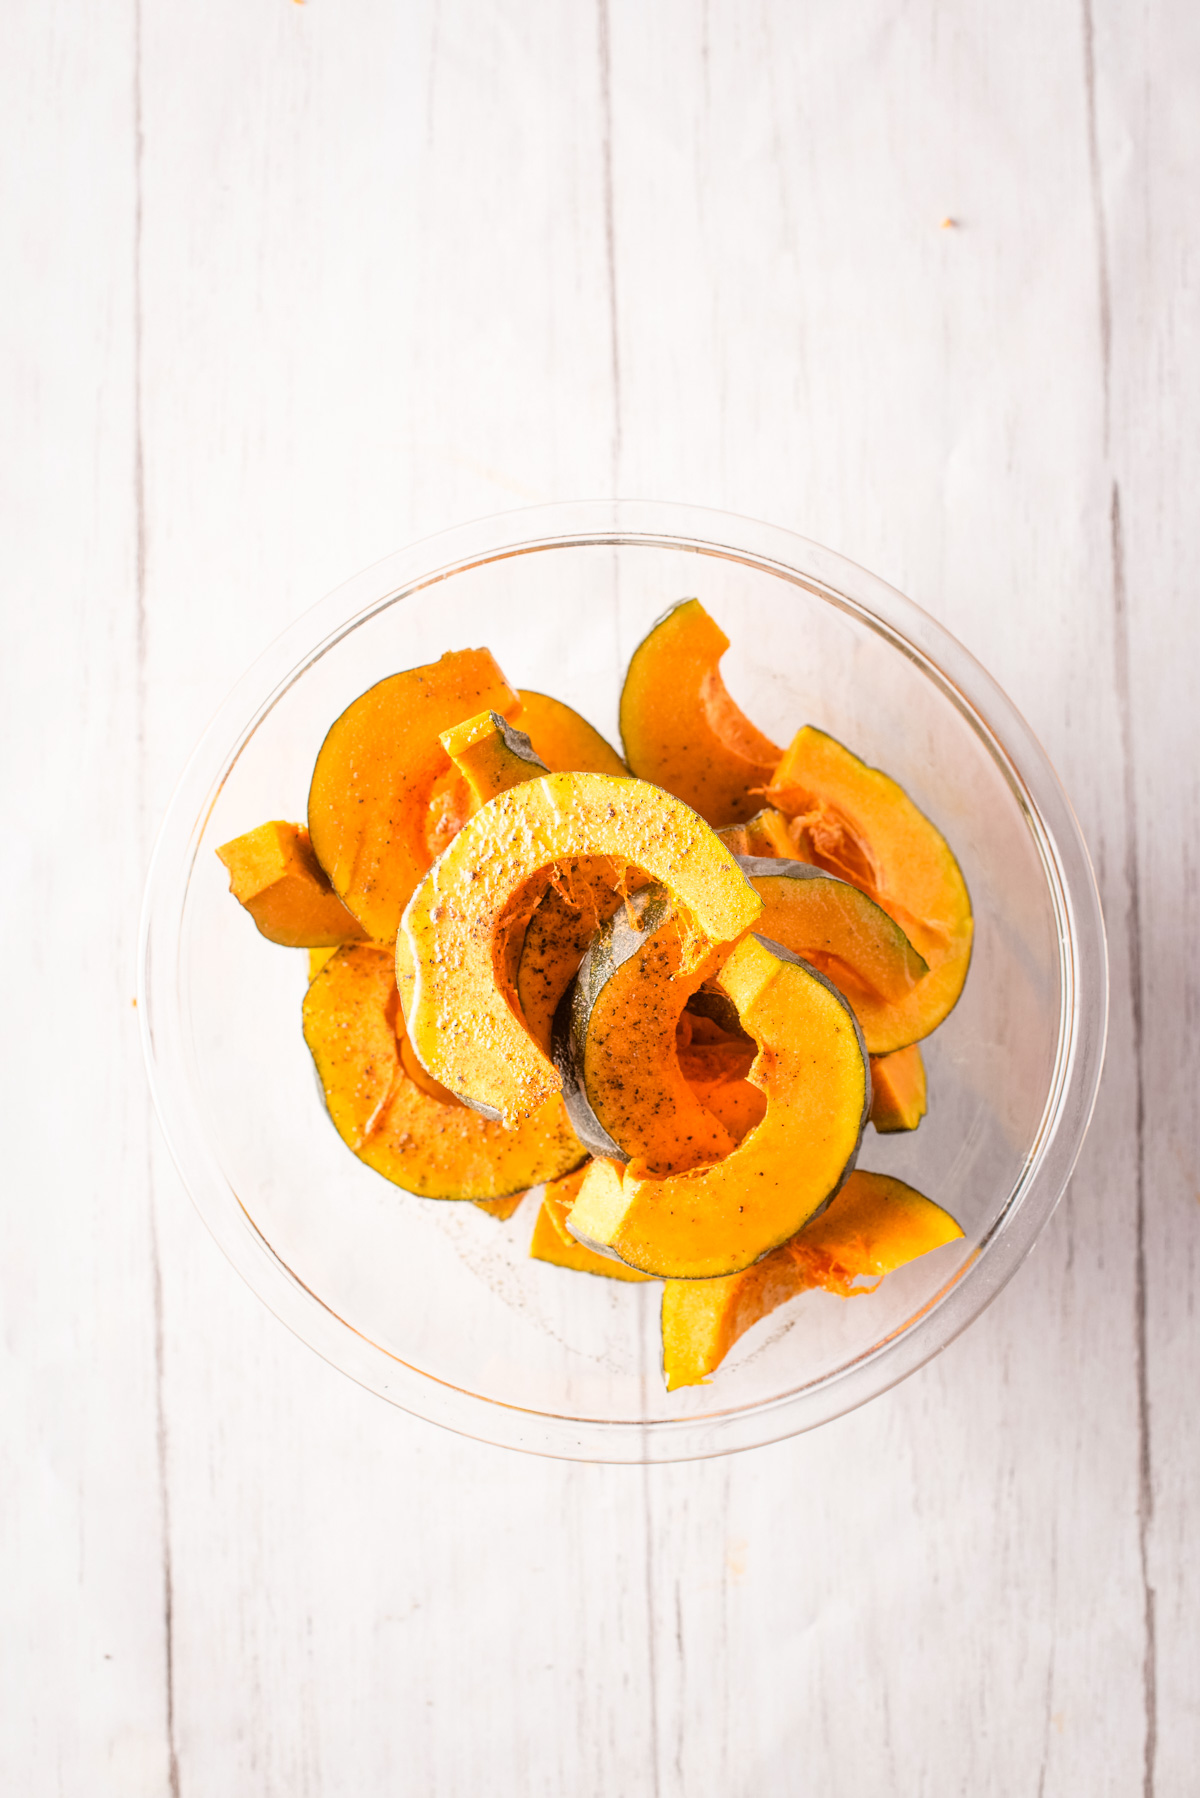 Overhead view of kabocha squash slices in a glass bowl tossed with salt and pepper.